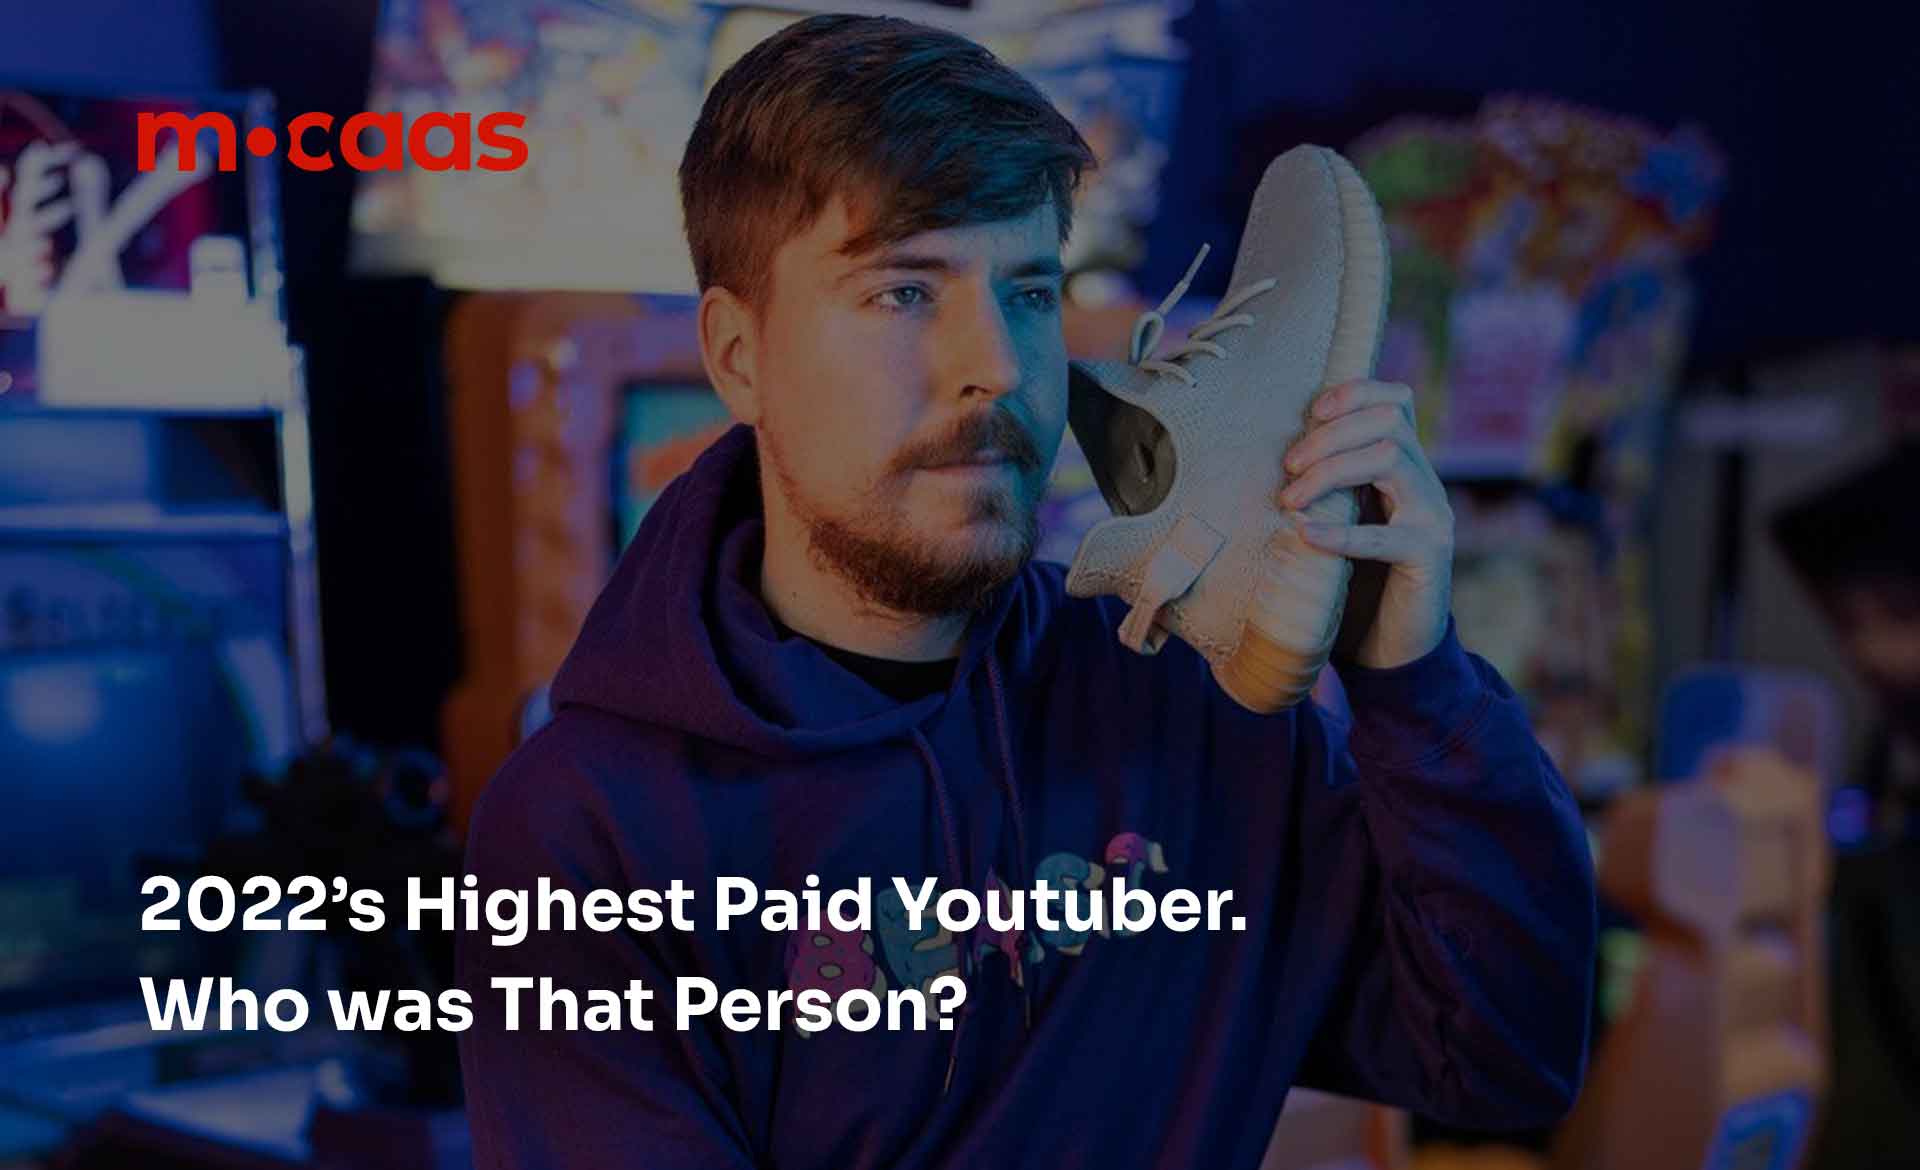 2022’s Highest Paid Youtuber. Who was That Person?